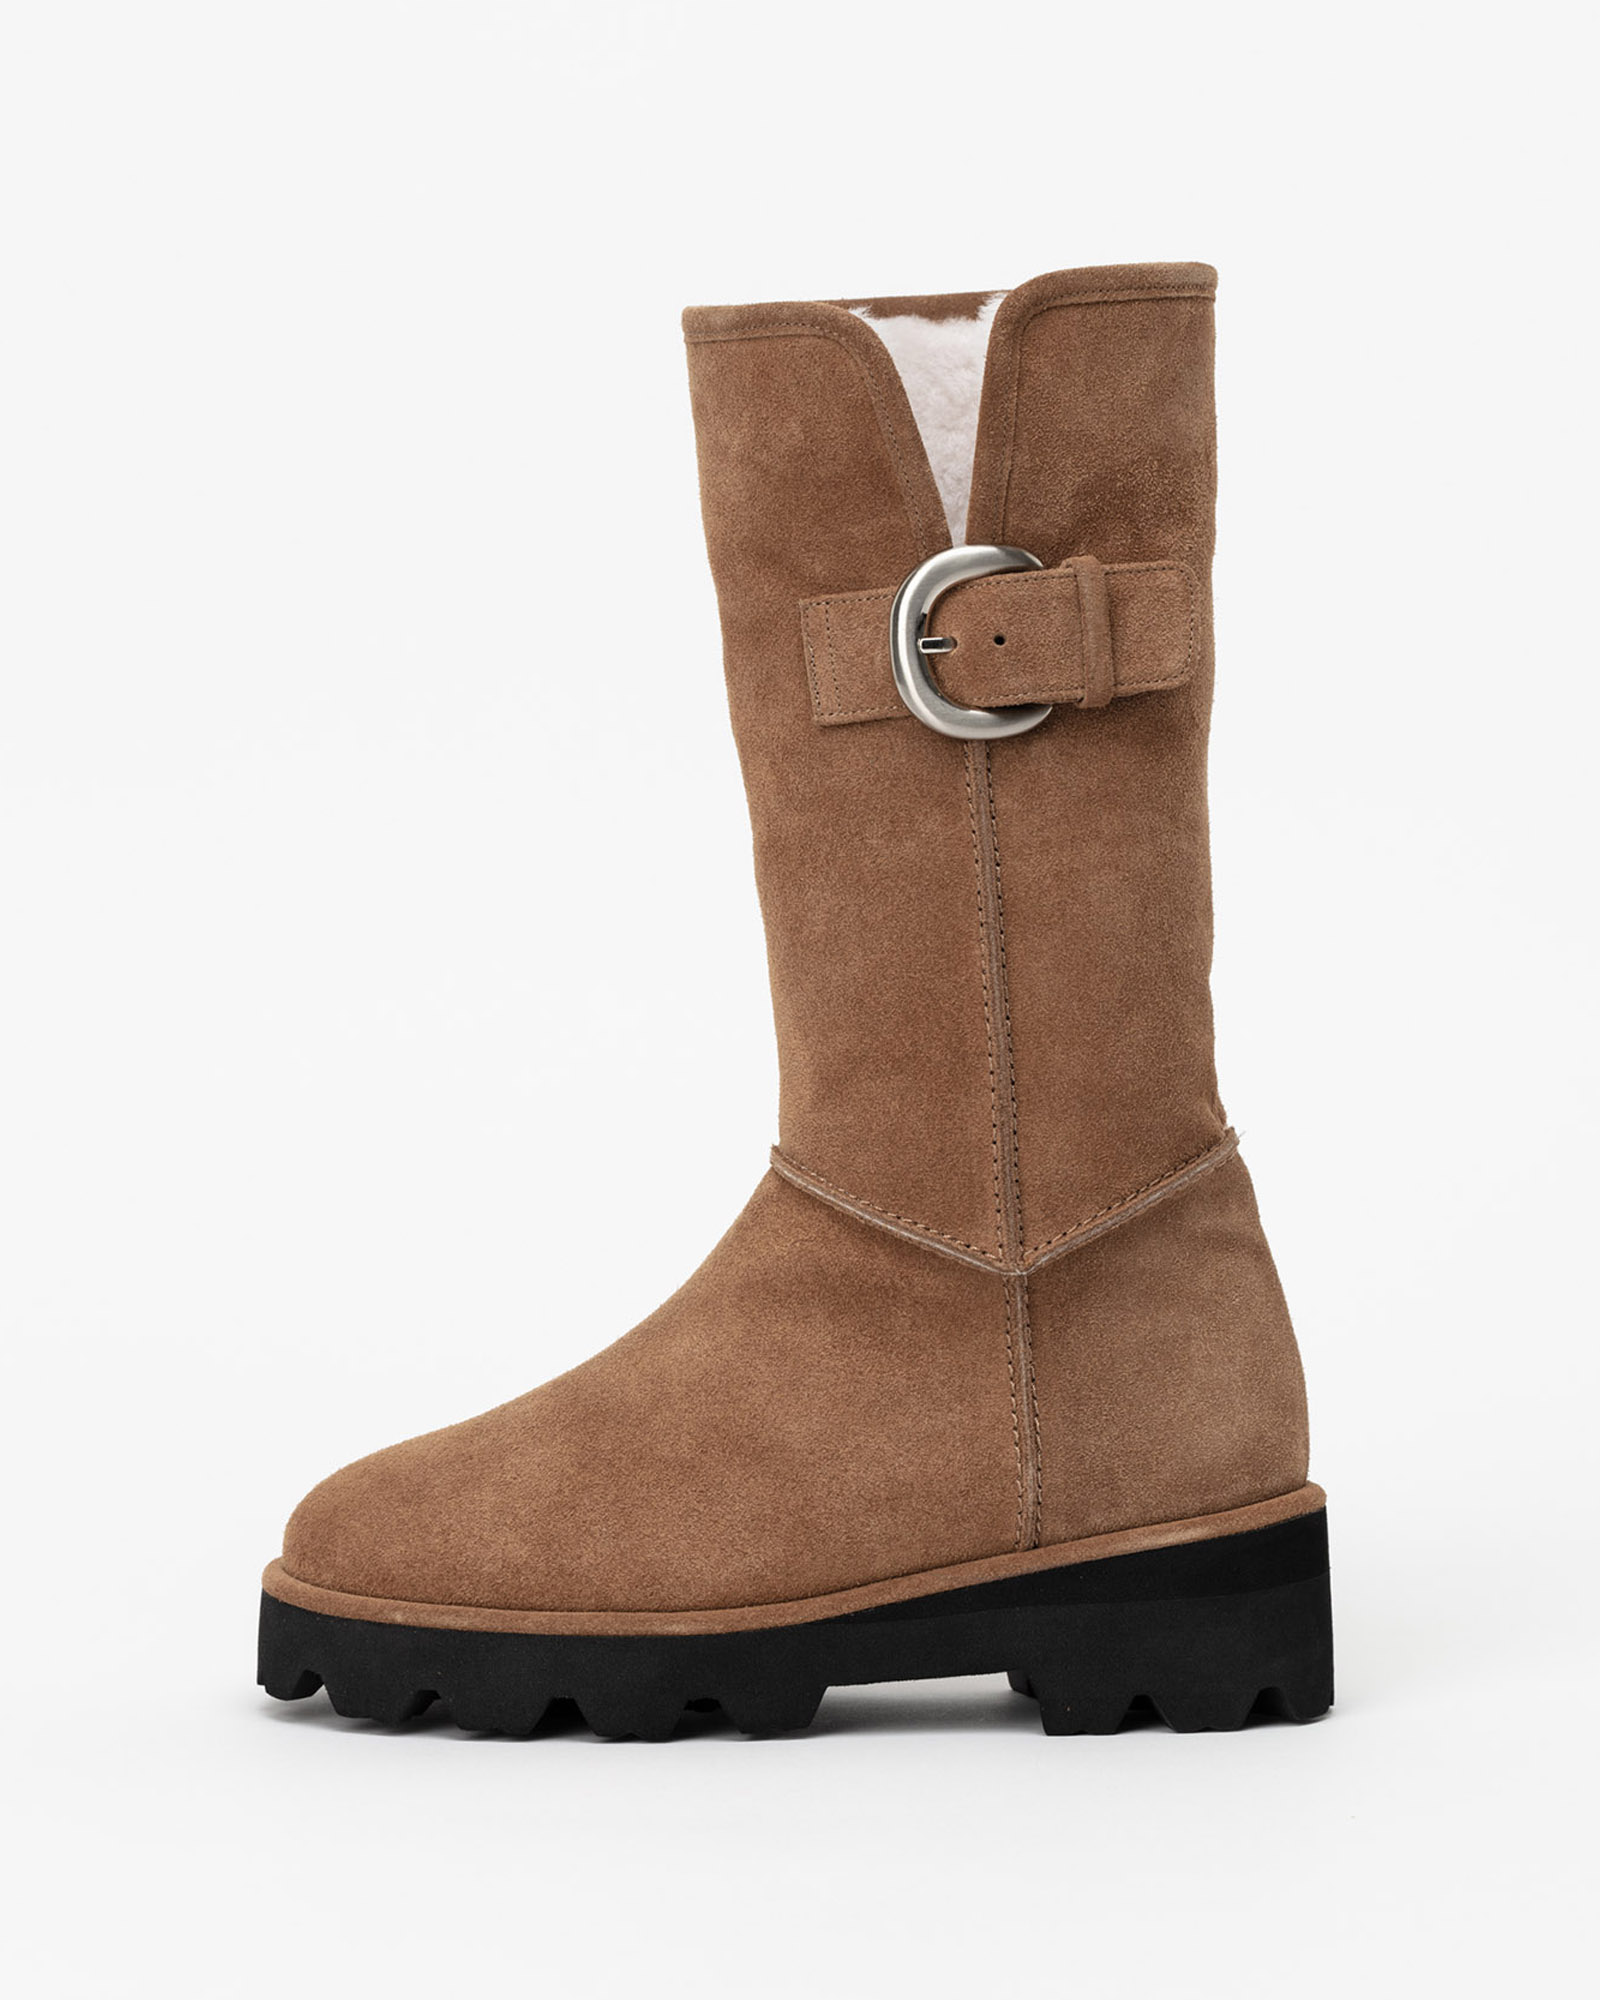 Vivace Shearling Boots - 쇼쉬르라팡 Chaussure Lapin